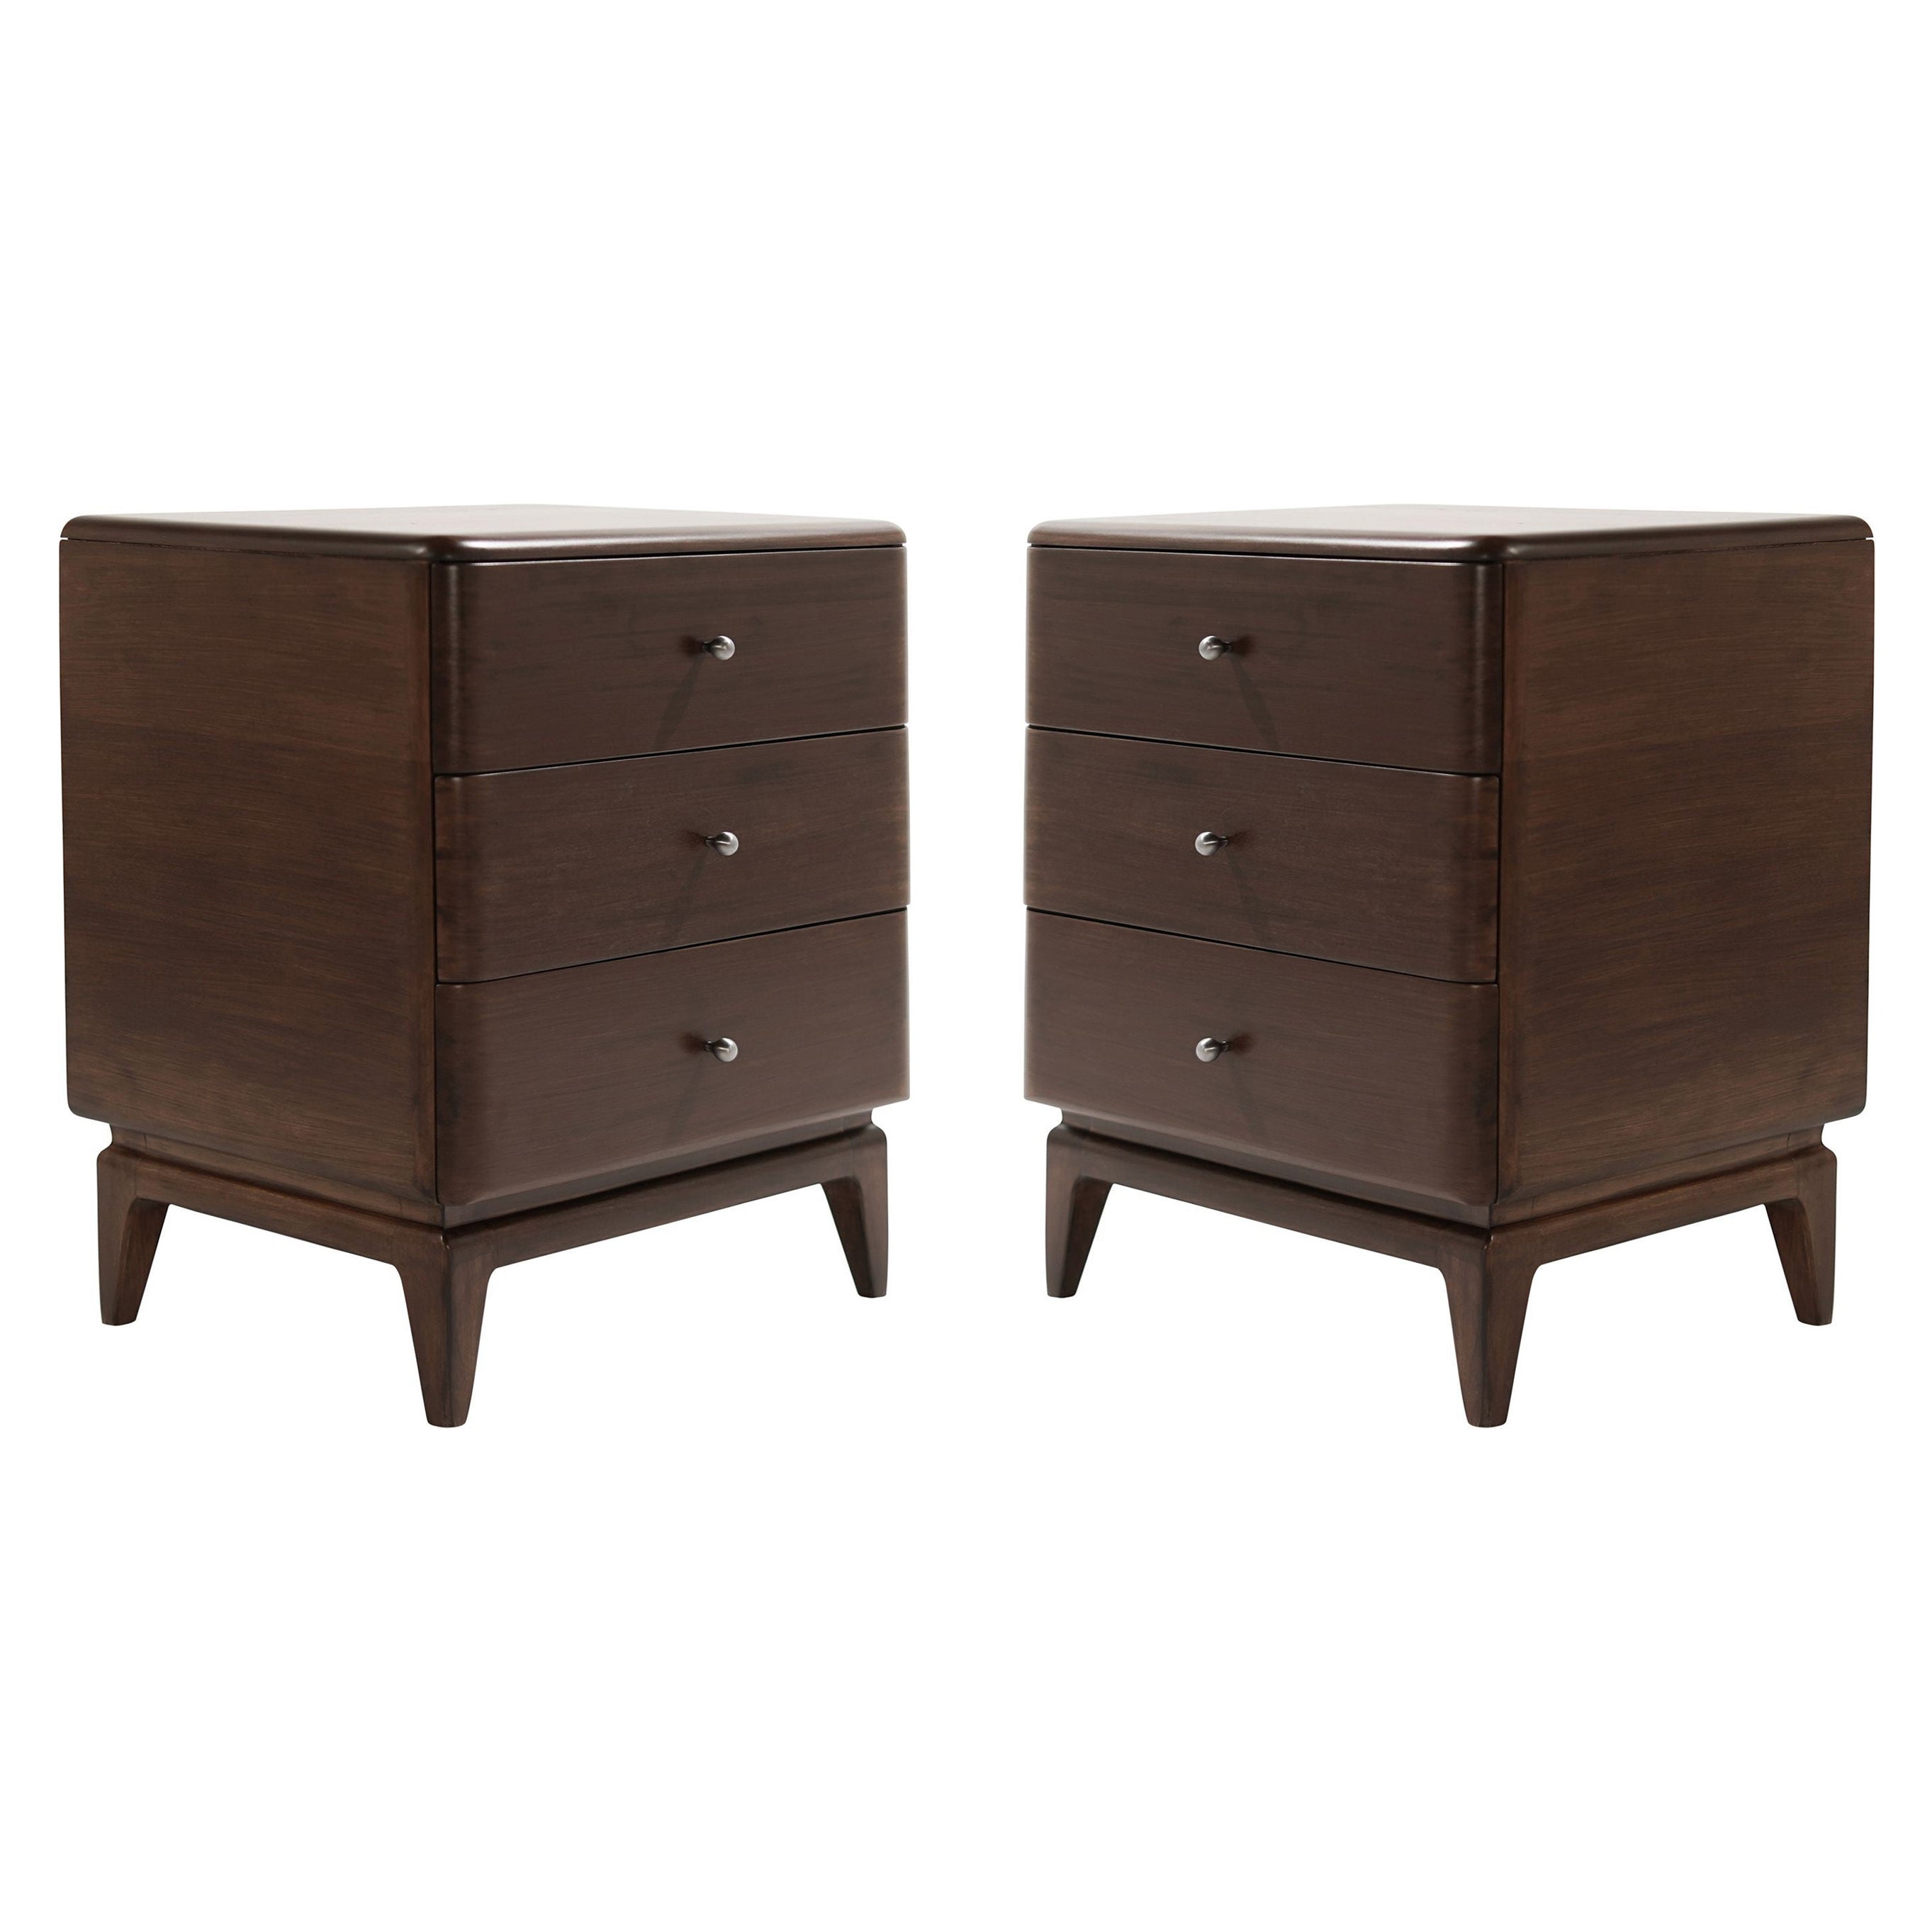 Set of Bedside Tables by Heywood Wakefield, 1950s